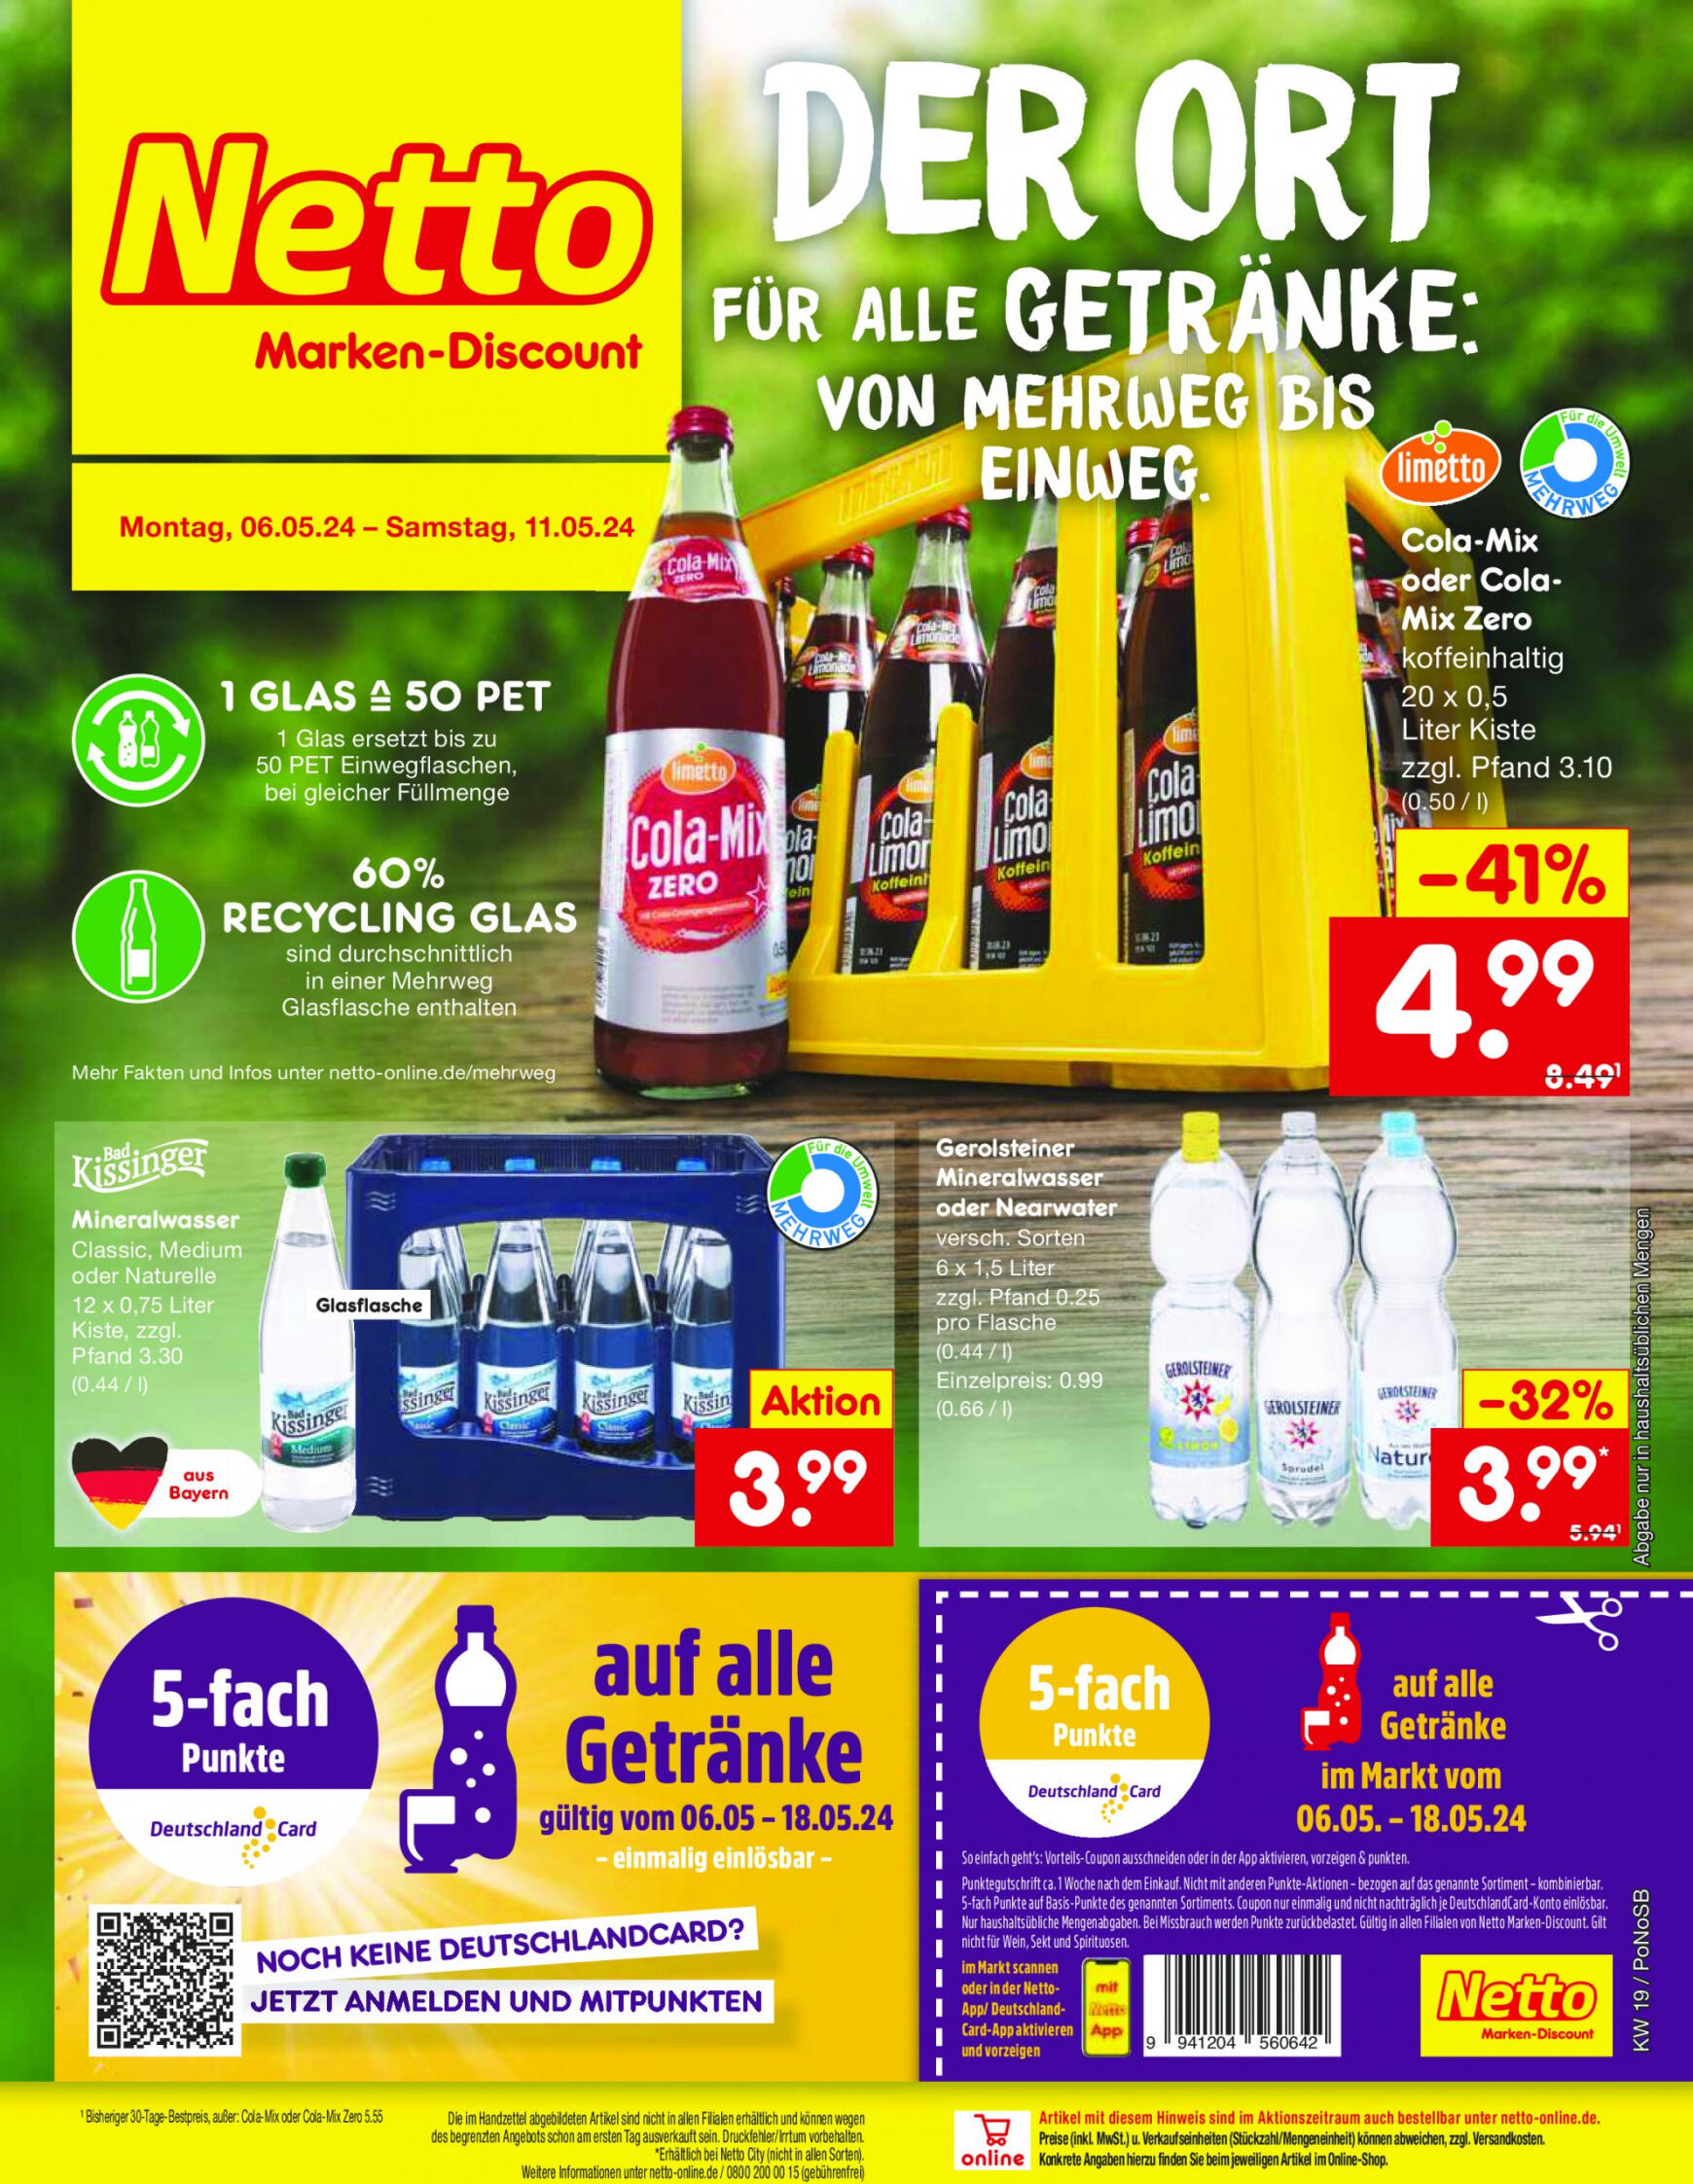 netto - Flyer Netto aktuell 06.05. - 11.05. - page: 18